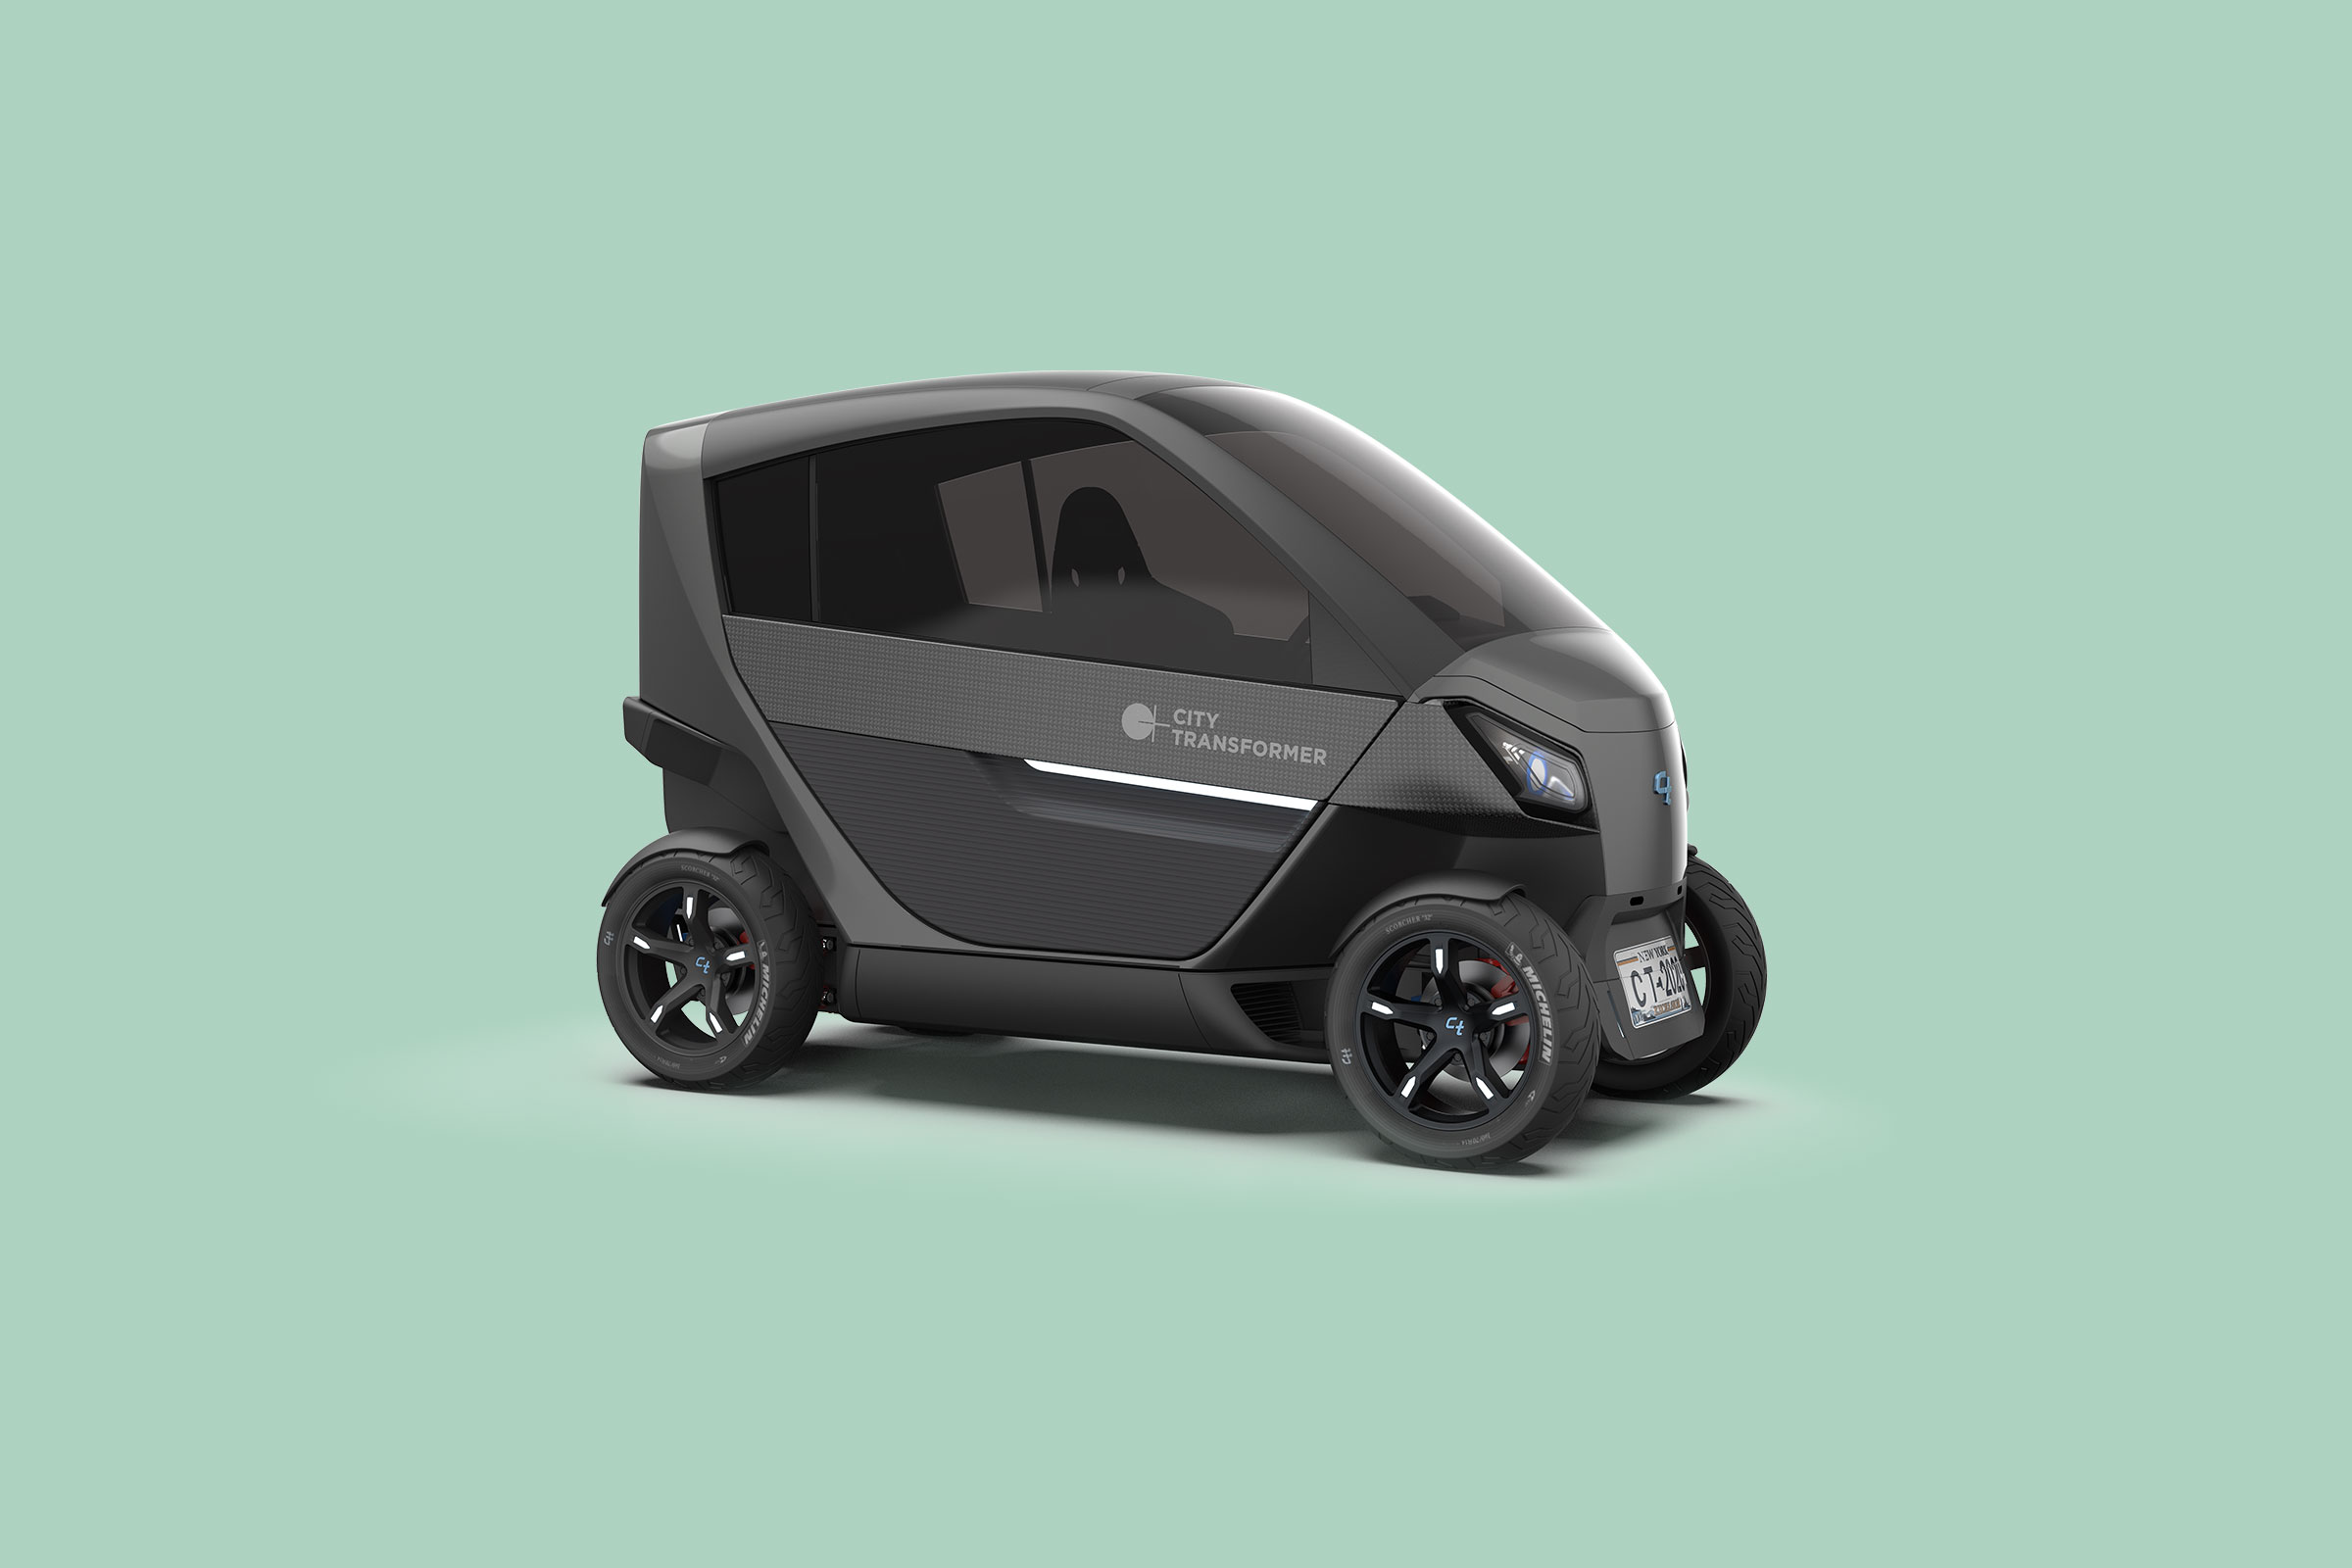 Best Inventions 2020 / Special Mentions: Foldable electric city vehicle